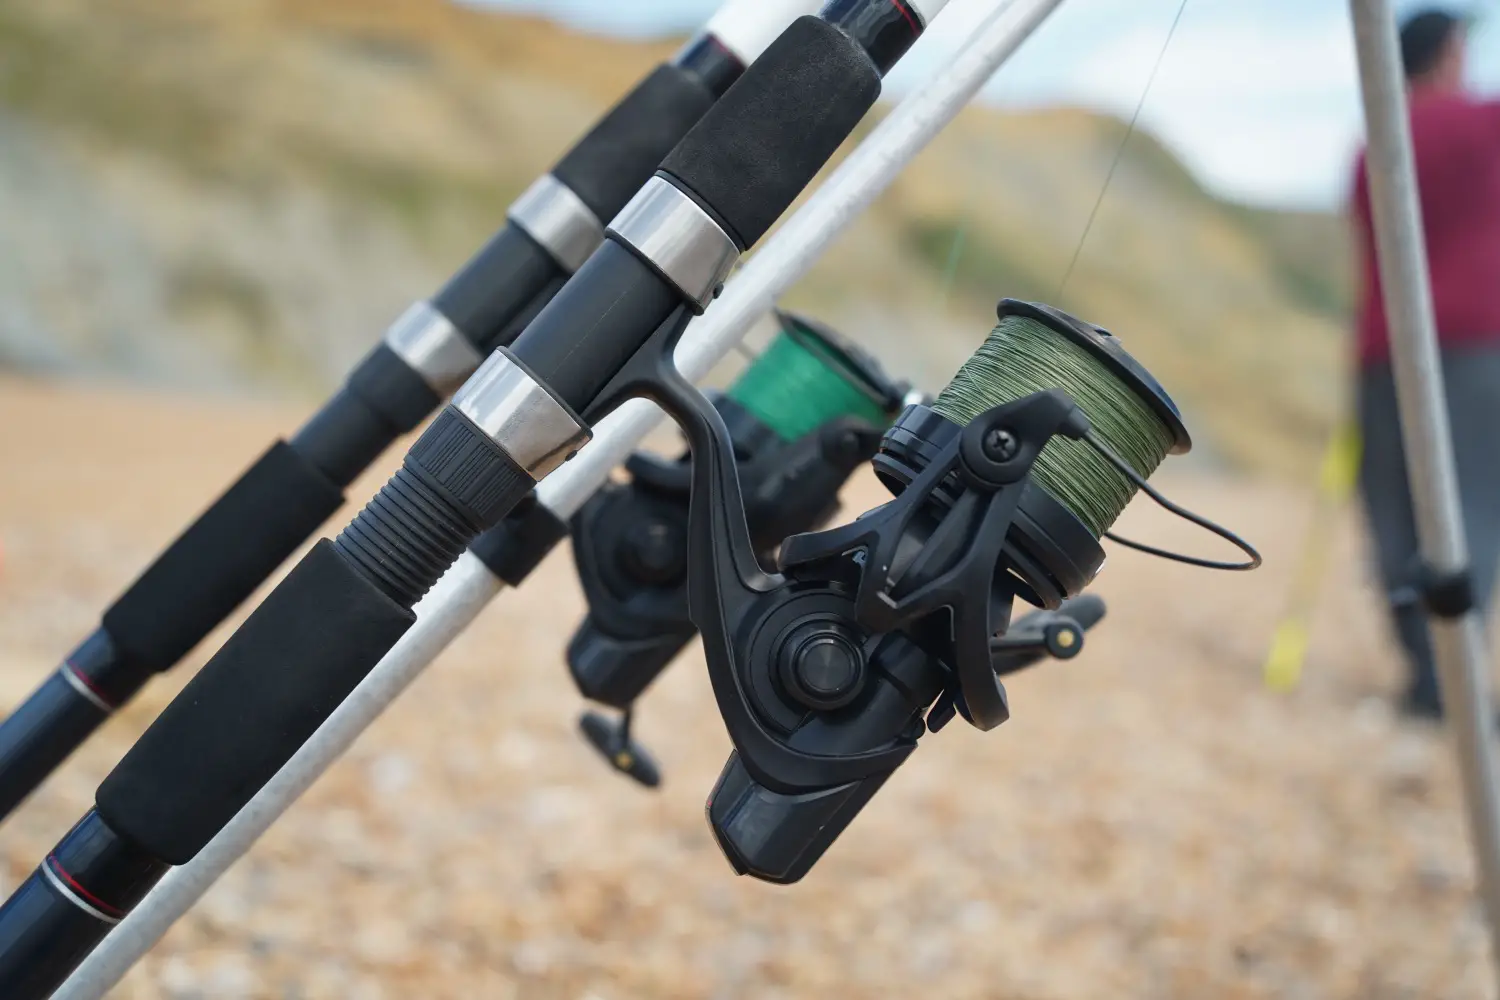 Top 5 Long-Distance Surfcasting Reels - Wide Open Spaces